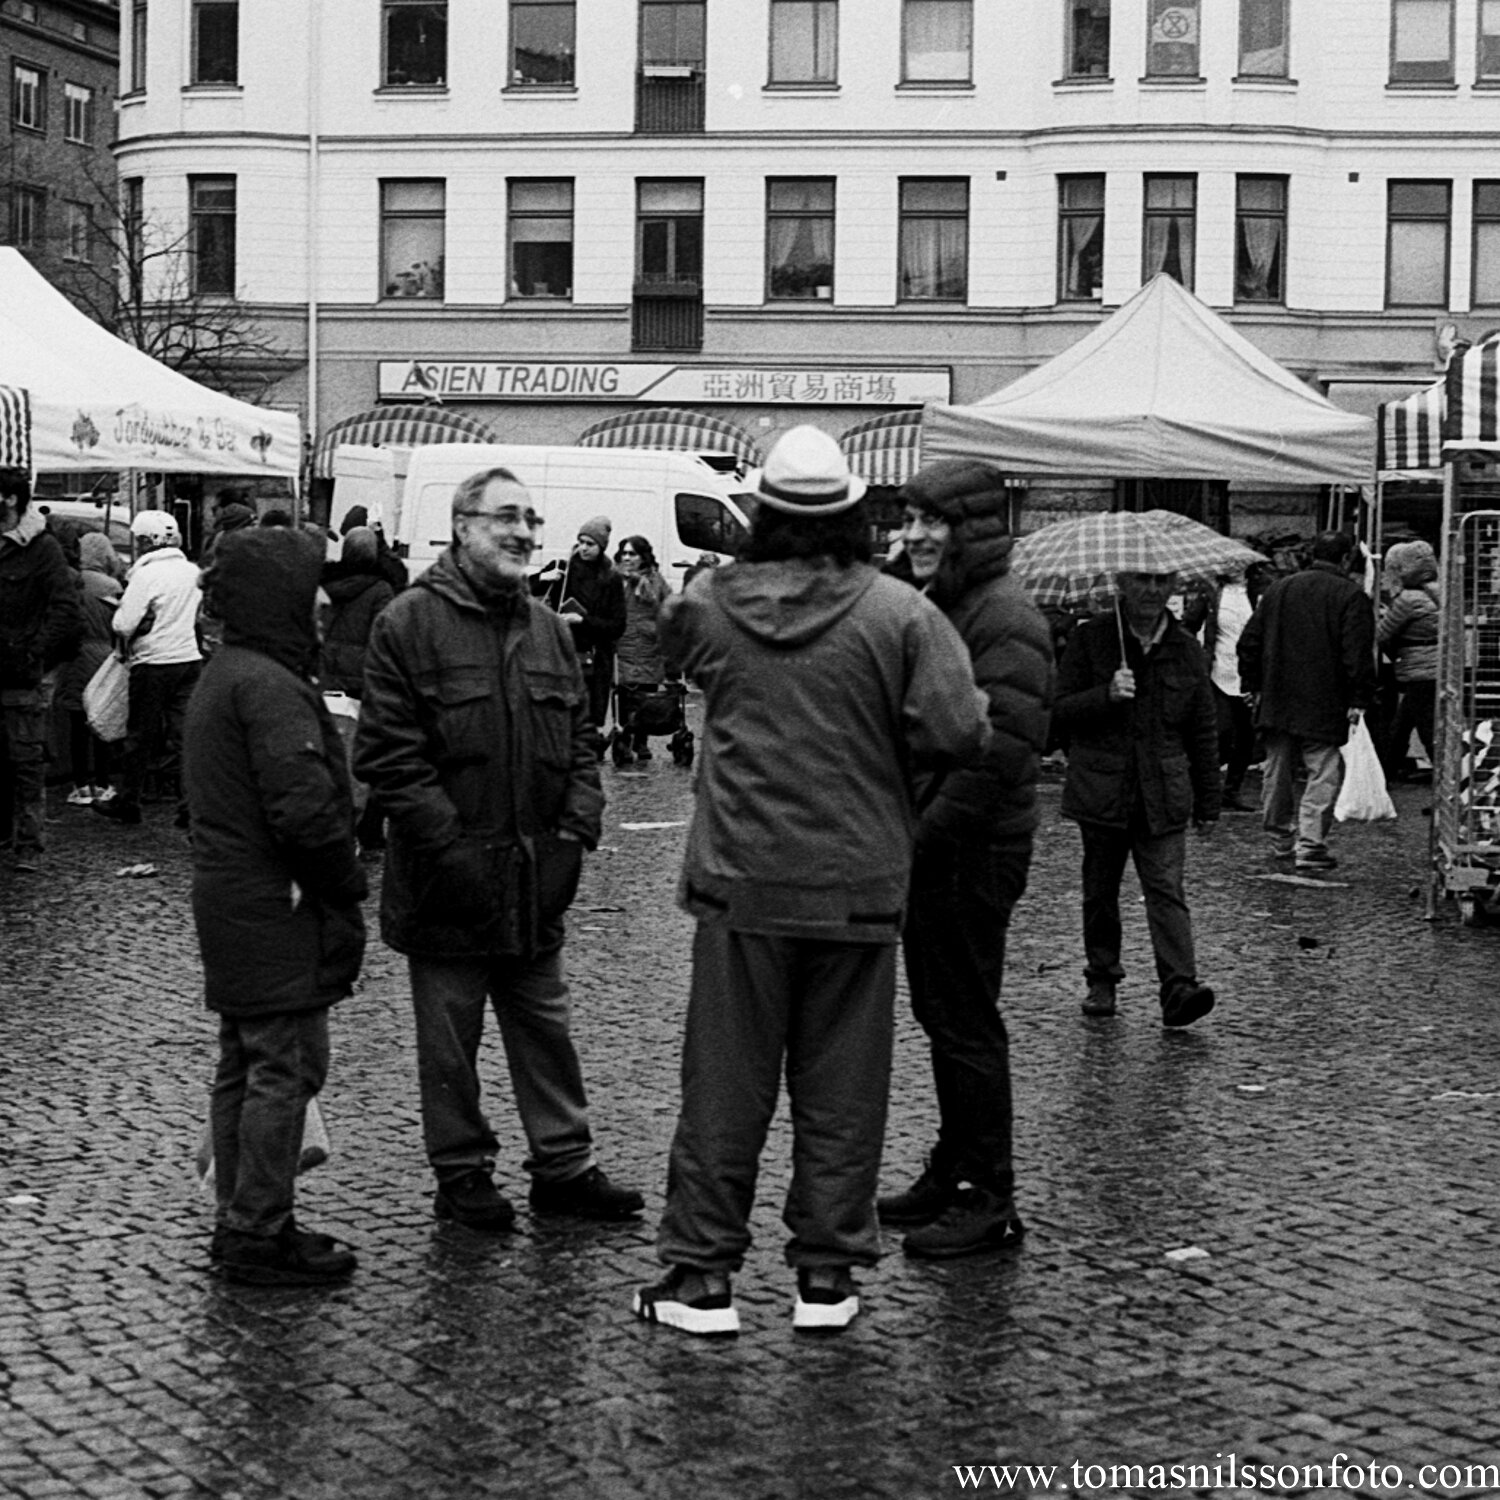 Day 340 - December 6: Friendly chat in the rain